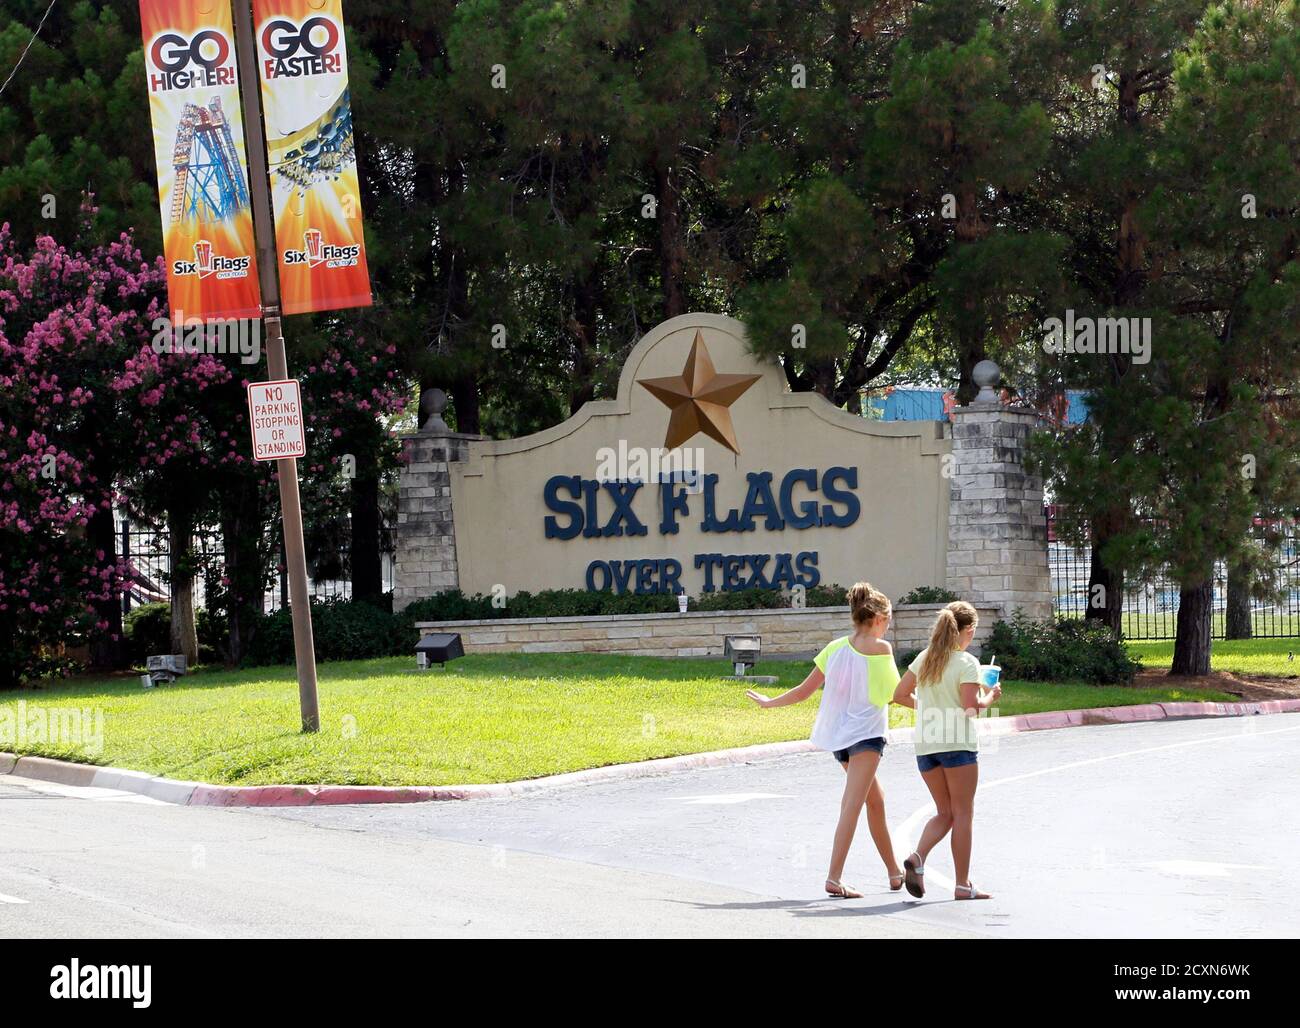 Two girls walk past the entrance of the Six Flags Over Texas amusement park in Arlington, Texas July 23, 2013.  A woman who plunged from the Texas Giant roller coaster ride at the Six Flags Over Texas amusement park died of multiple traumatic injuries in a fall that was ruled an accident, authorities said on Monday.  REUTERS/Mike Stone (UNITED STATES - Tags: SOCIETY) Stock Photo